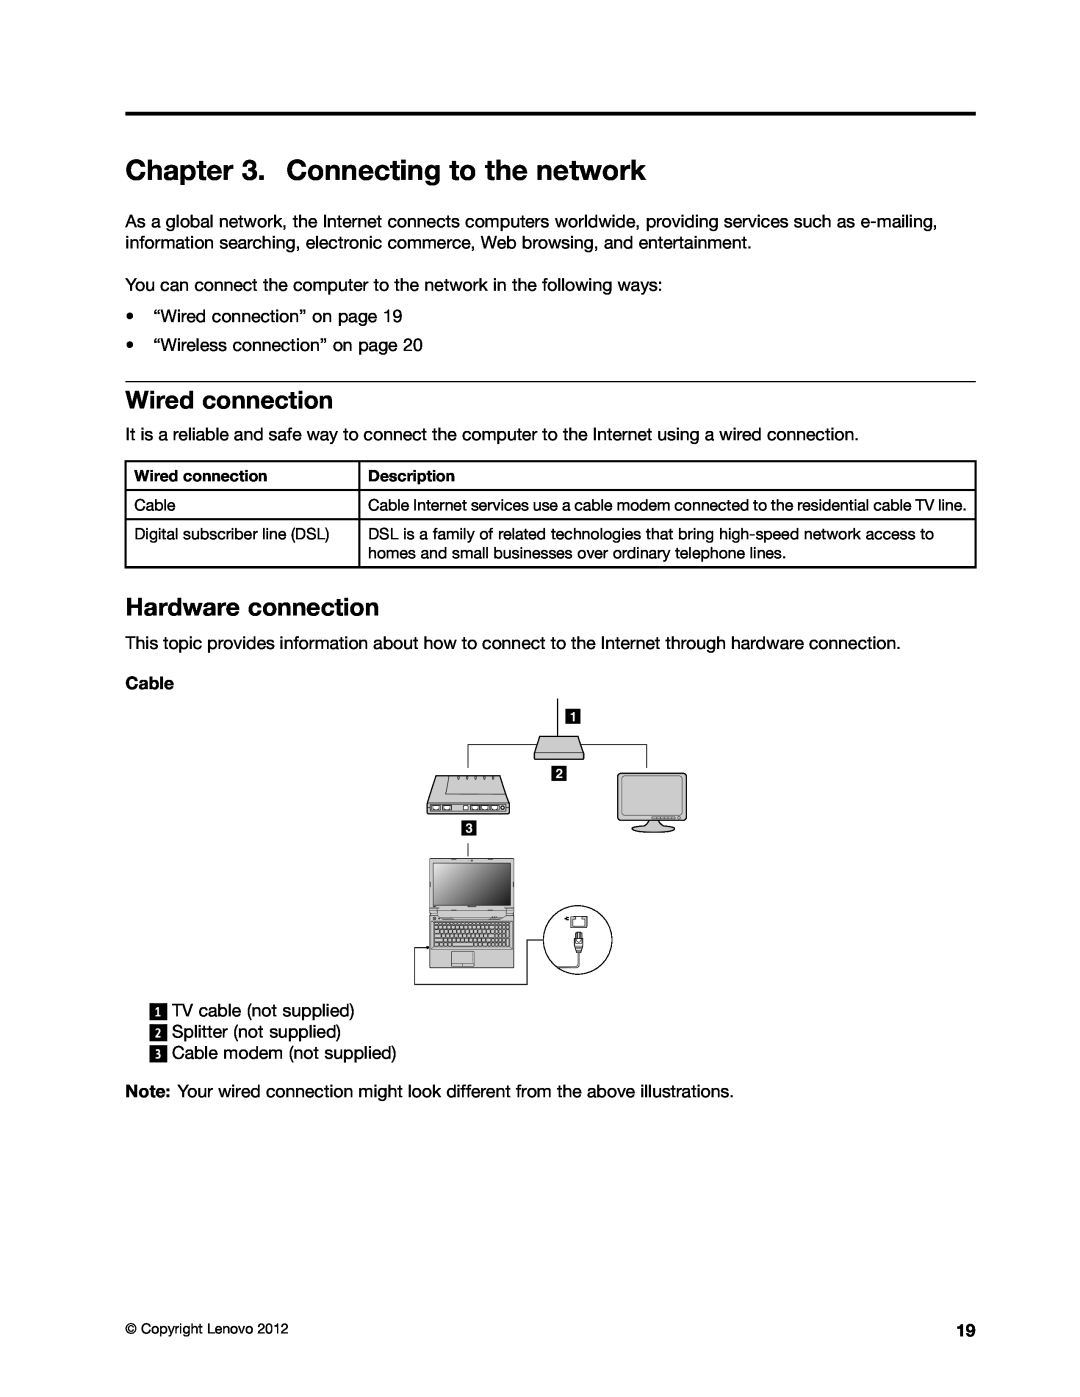 Lenovo 59366616, B590, B490 manual Connecting to the network, Wired connection, Hardware connection, Cable 